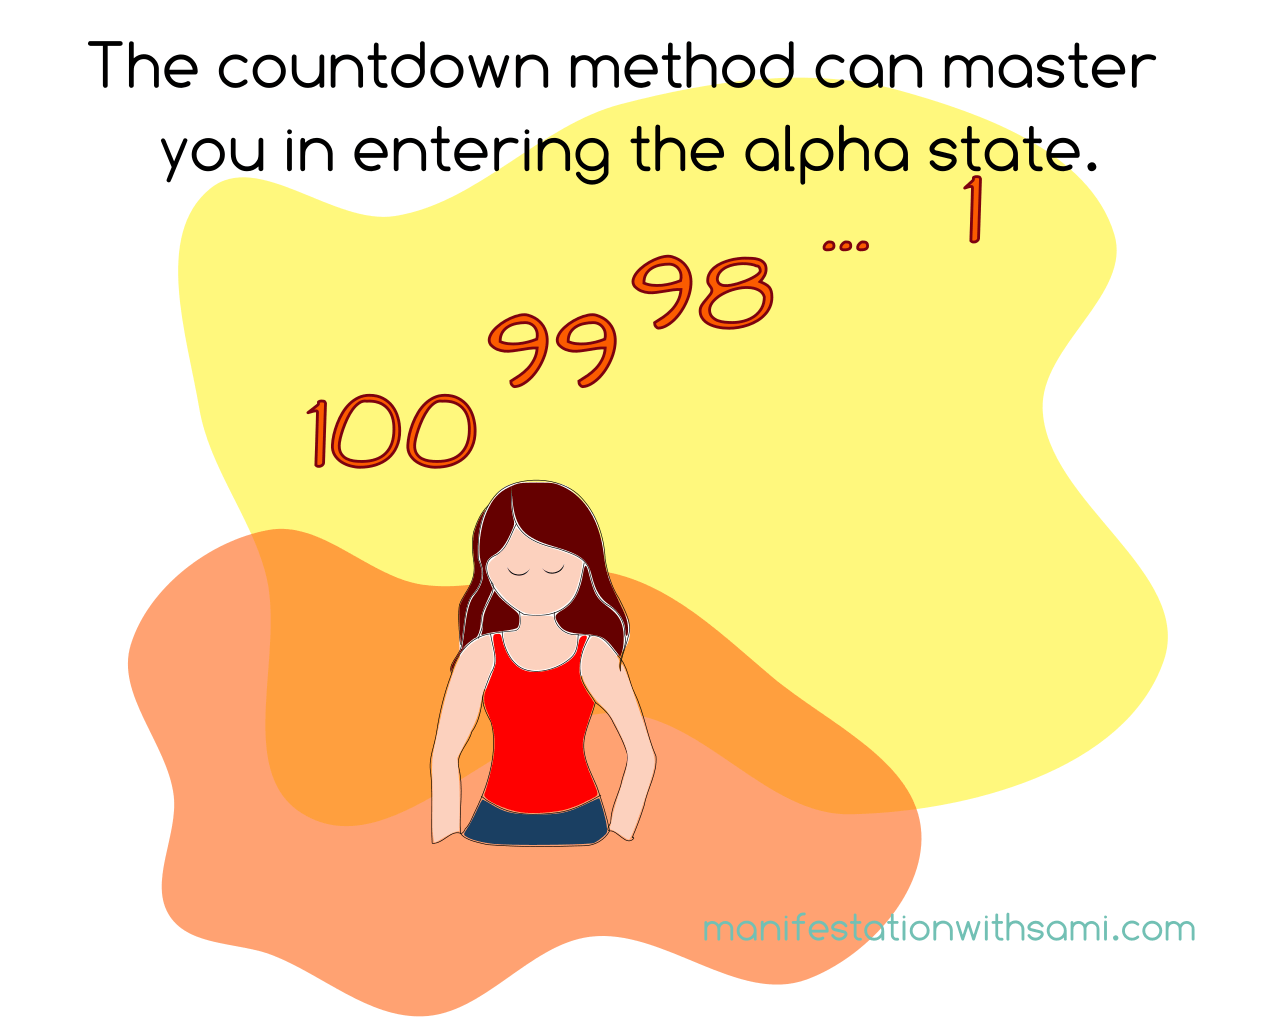 The countdown method can master you in entering the alpha state.